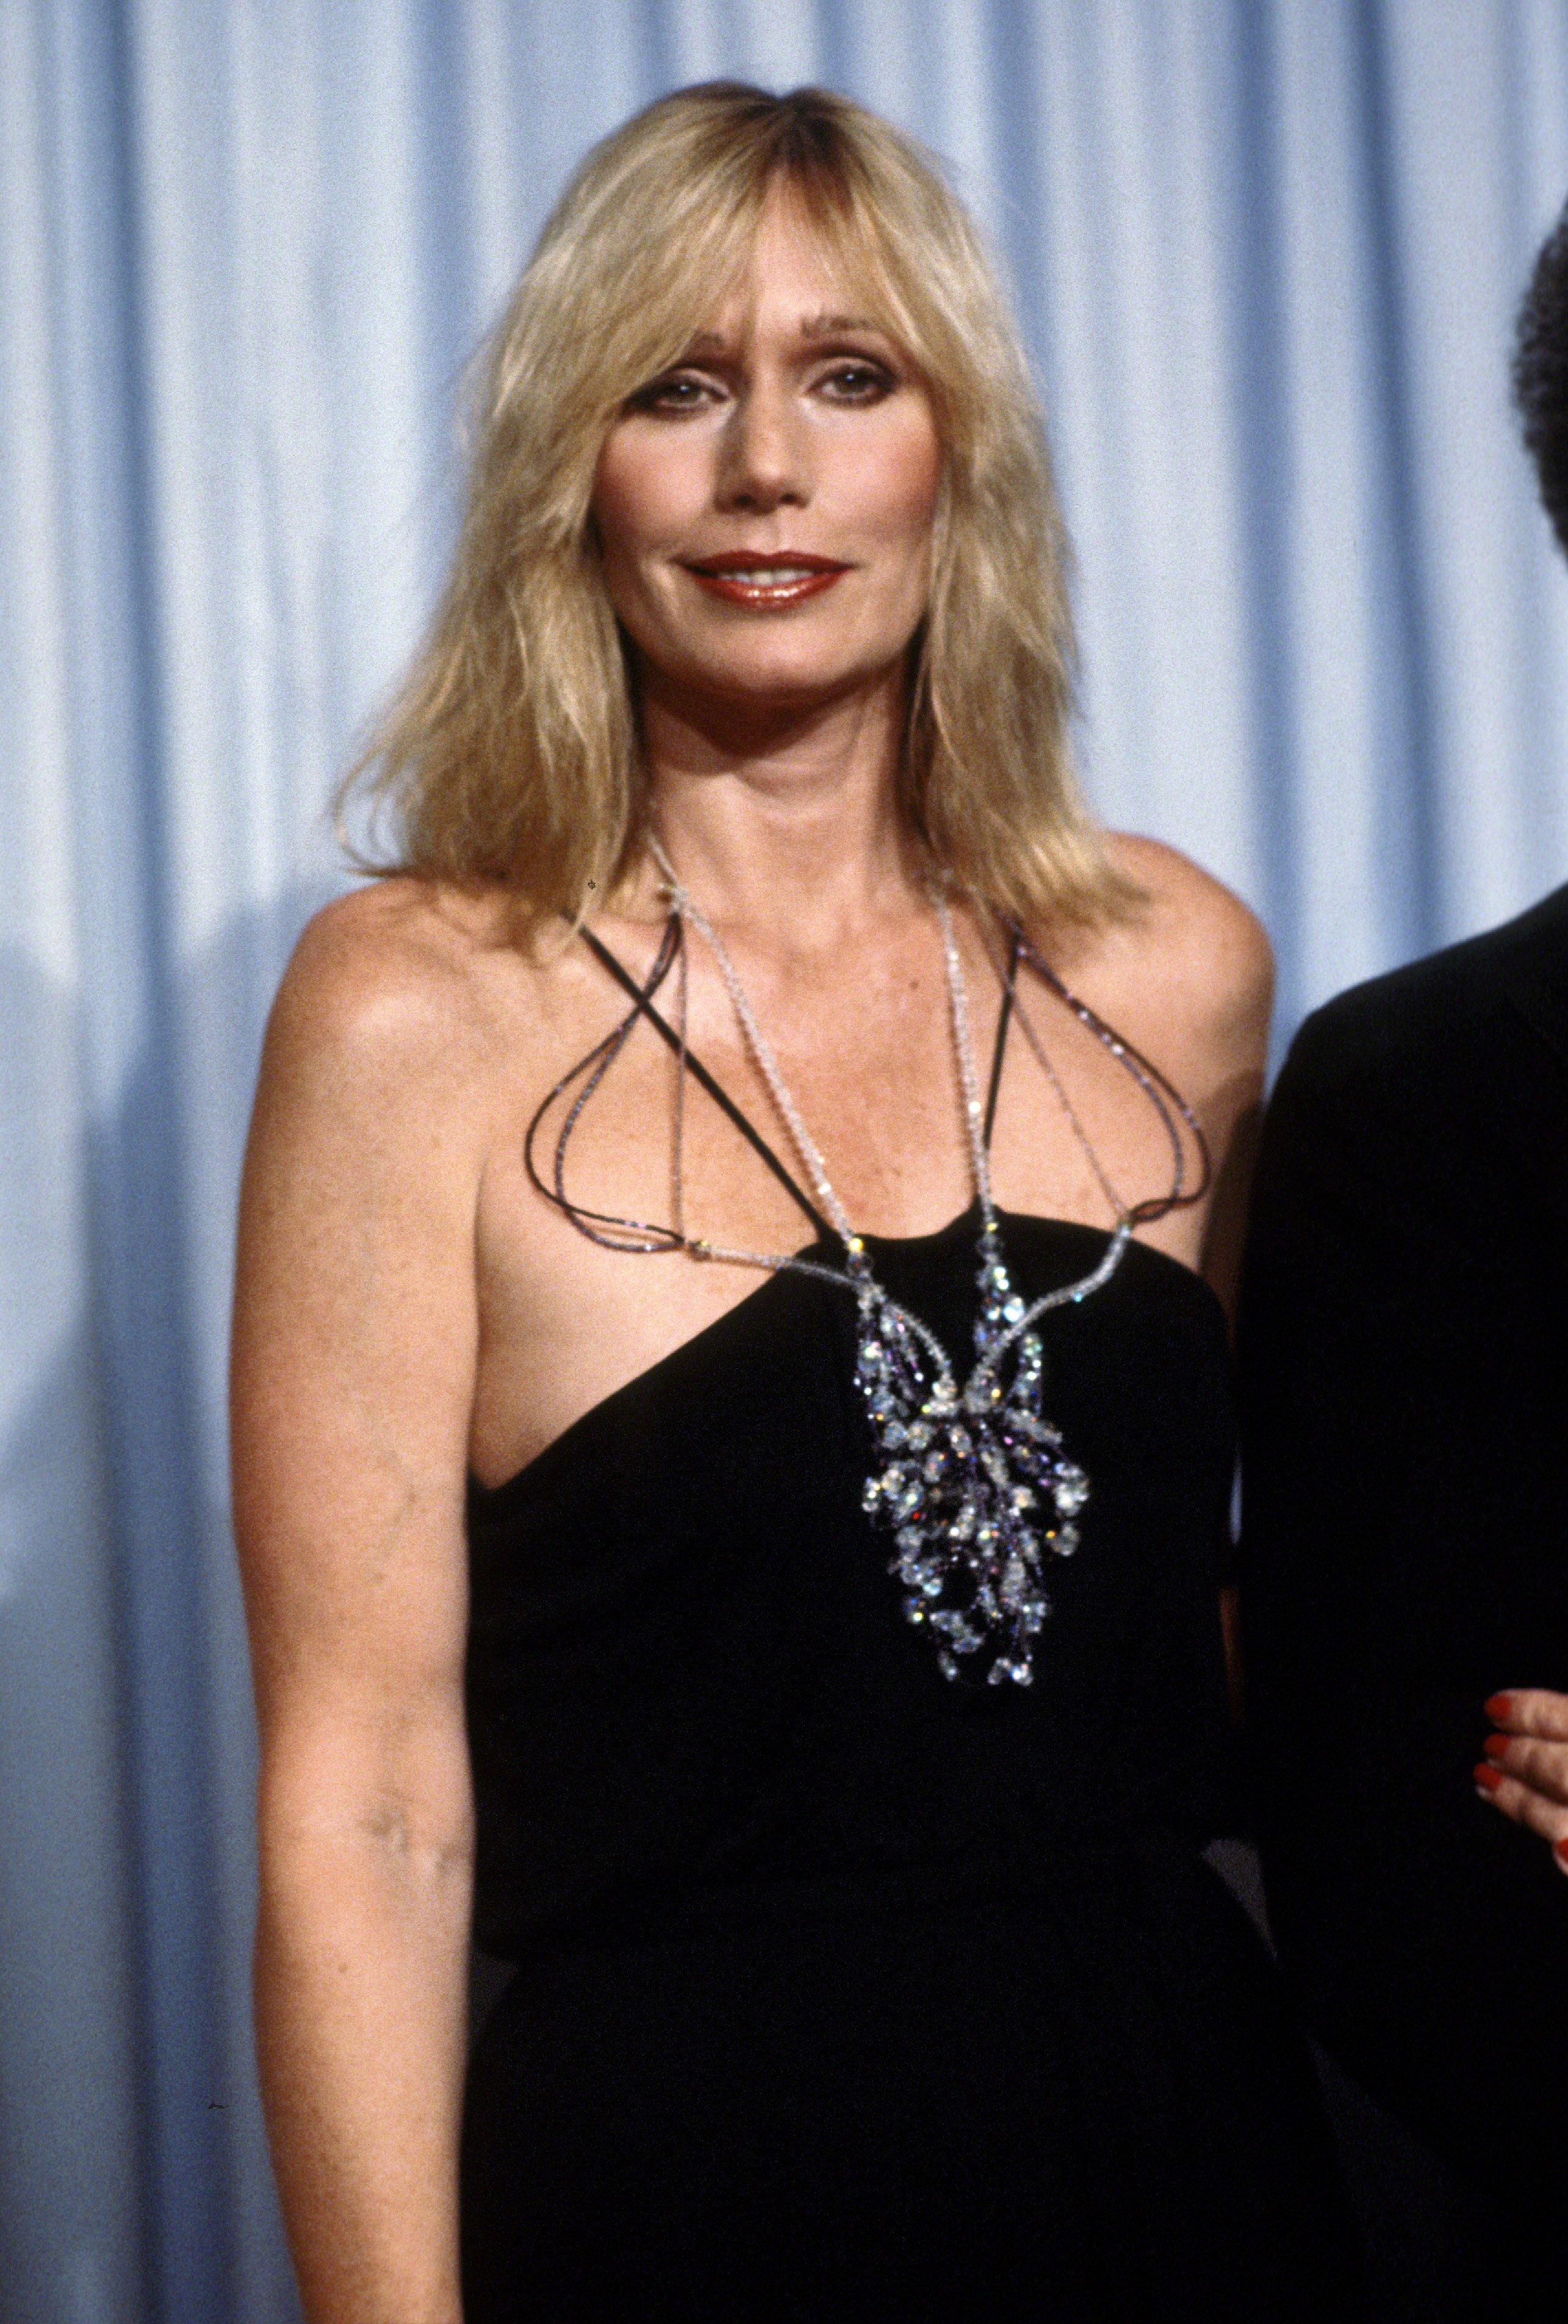 Sally Kellerman at the 52nd Academy Awards on April 14, 1980 | Source: Getty Images